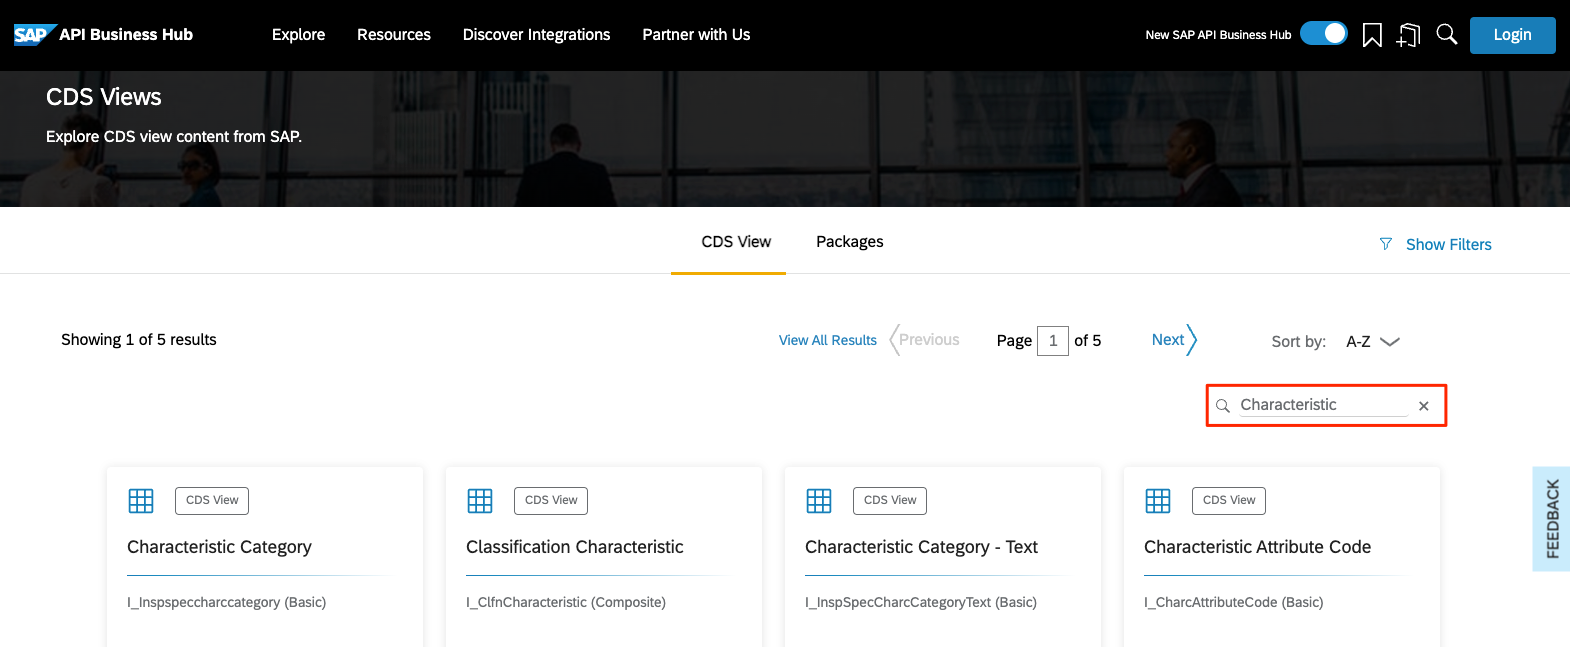 CDS View search results for Characteristic in the SAP API Business Hub